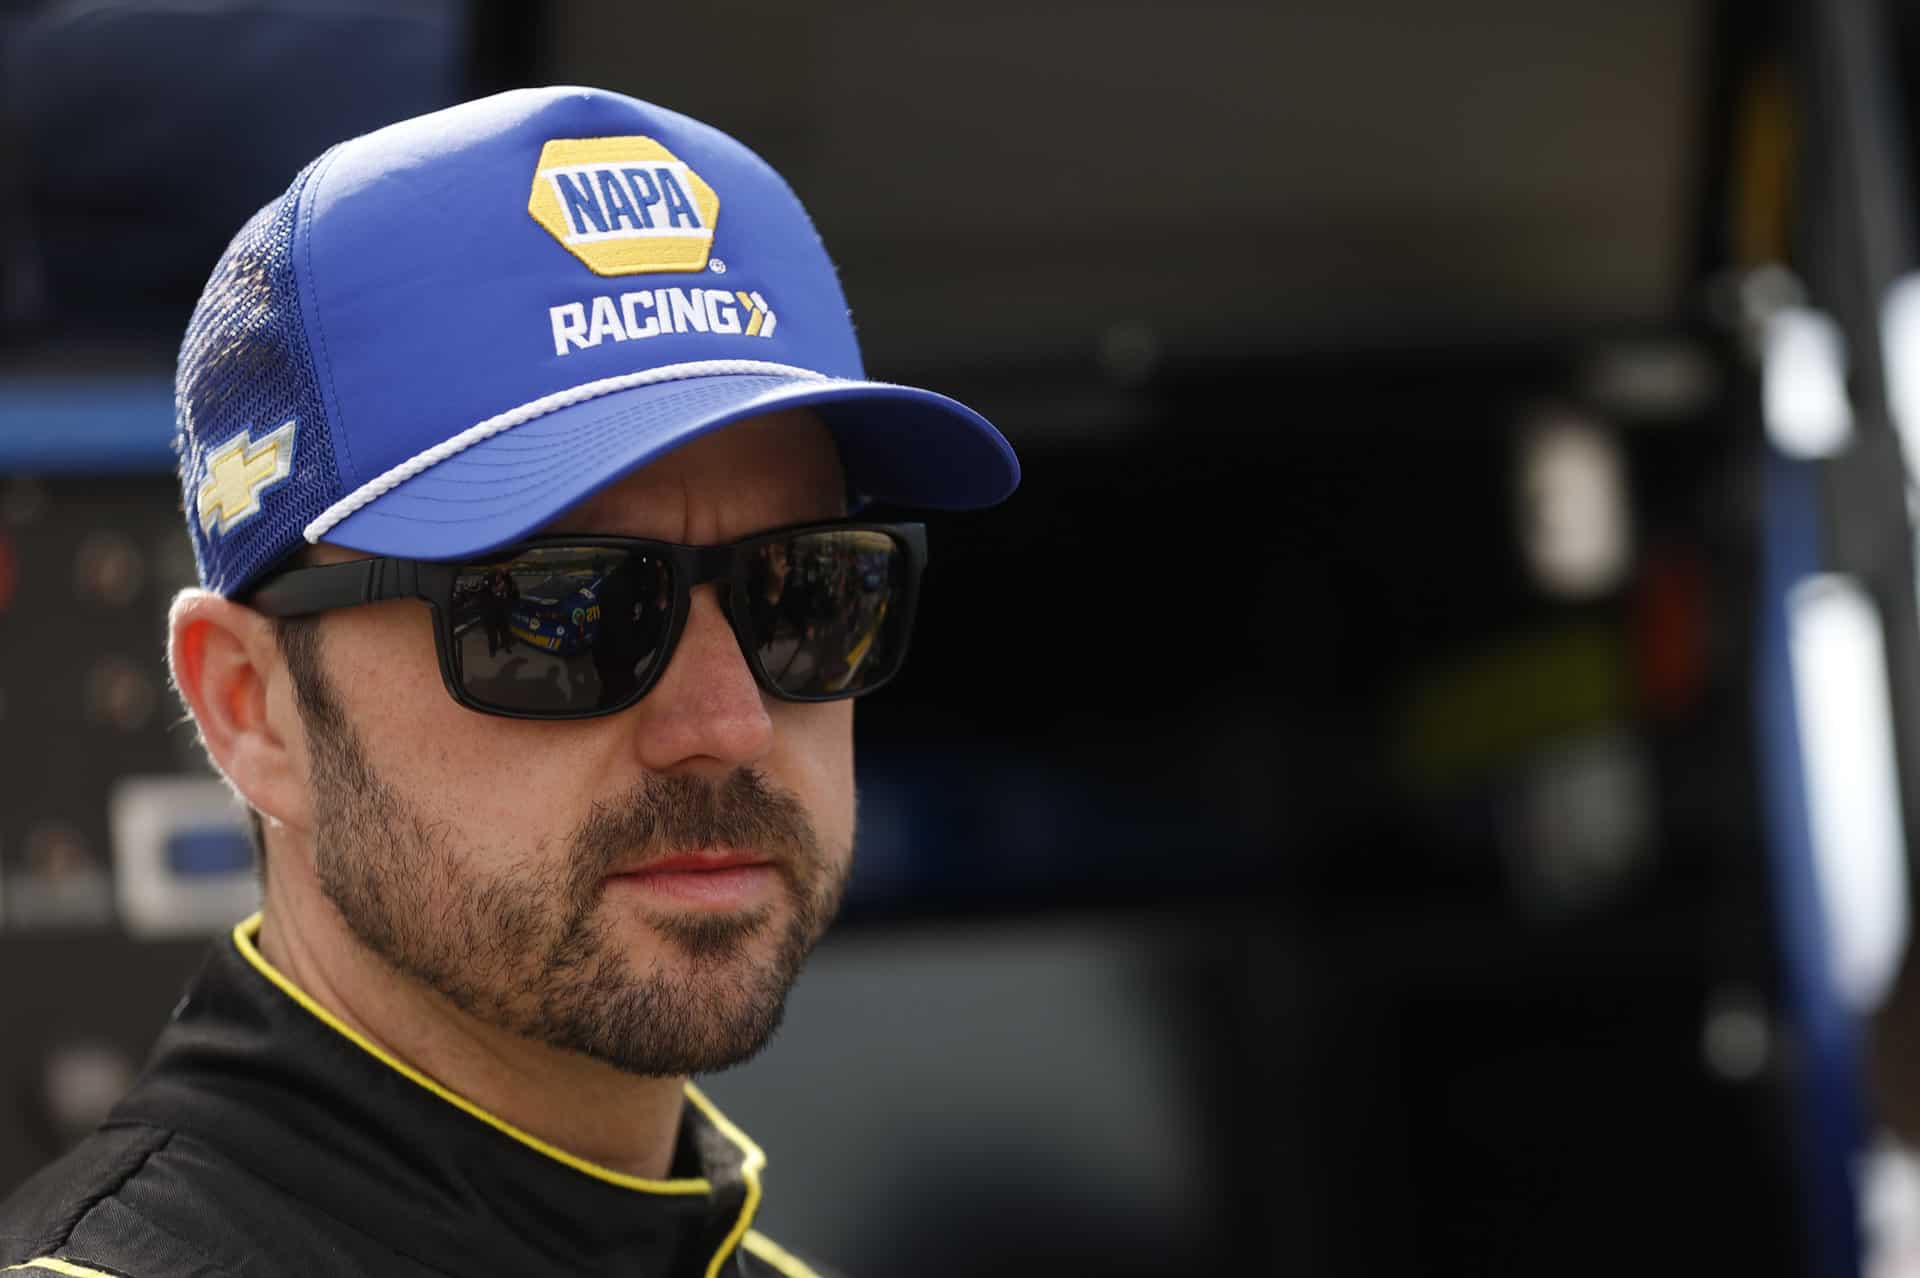 Josh Berry puts on a NAPA Racing hat as he substitutes for the injured Chase Elliott at Las Vegas Motor Speedway. Photo by Nigel Kinrade Photography.